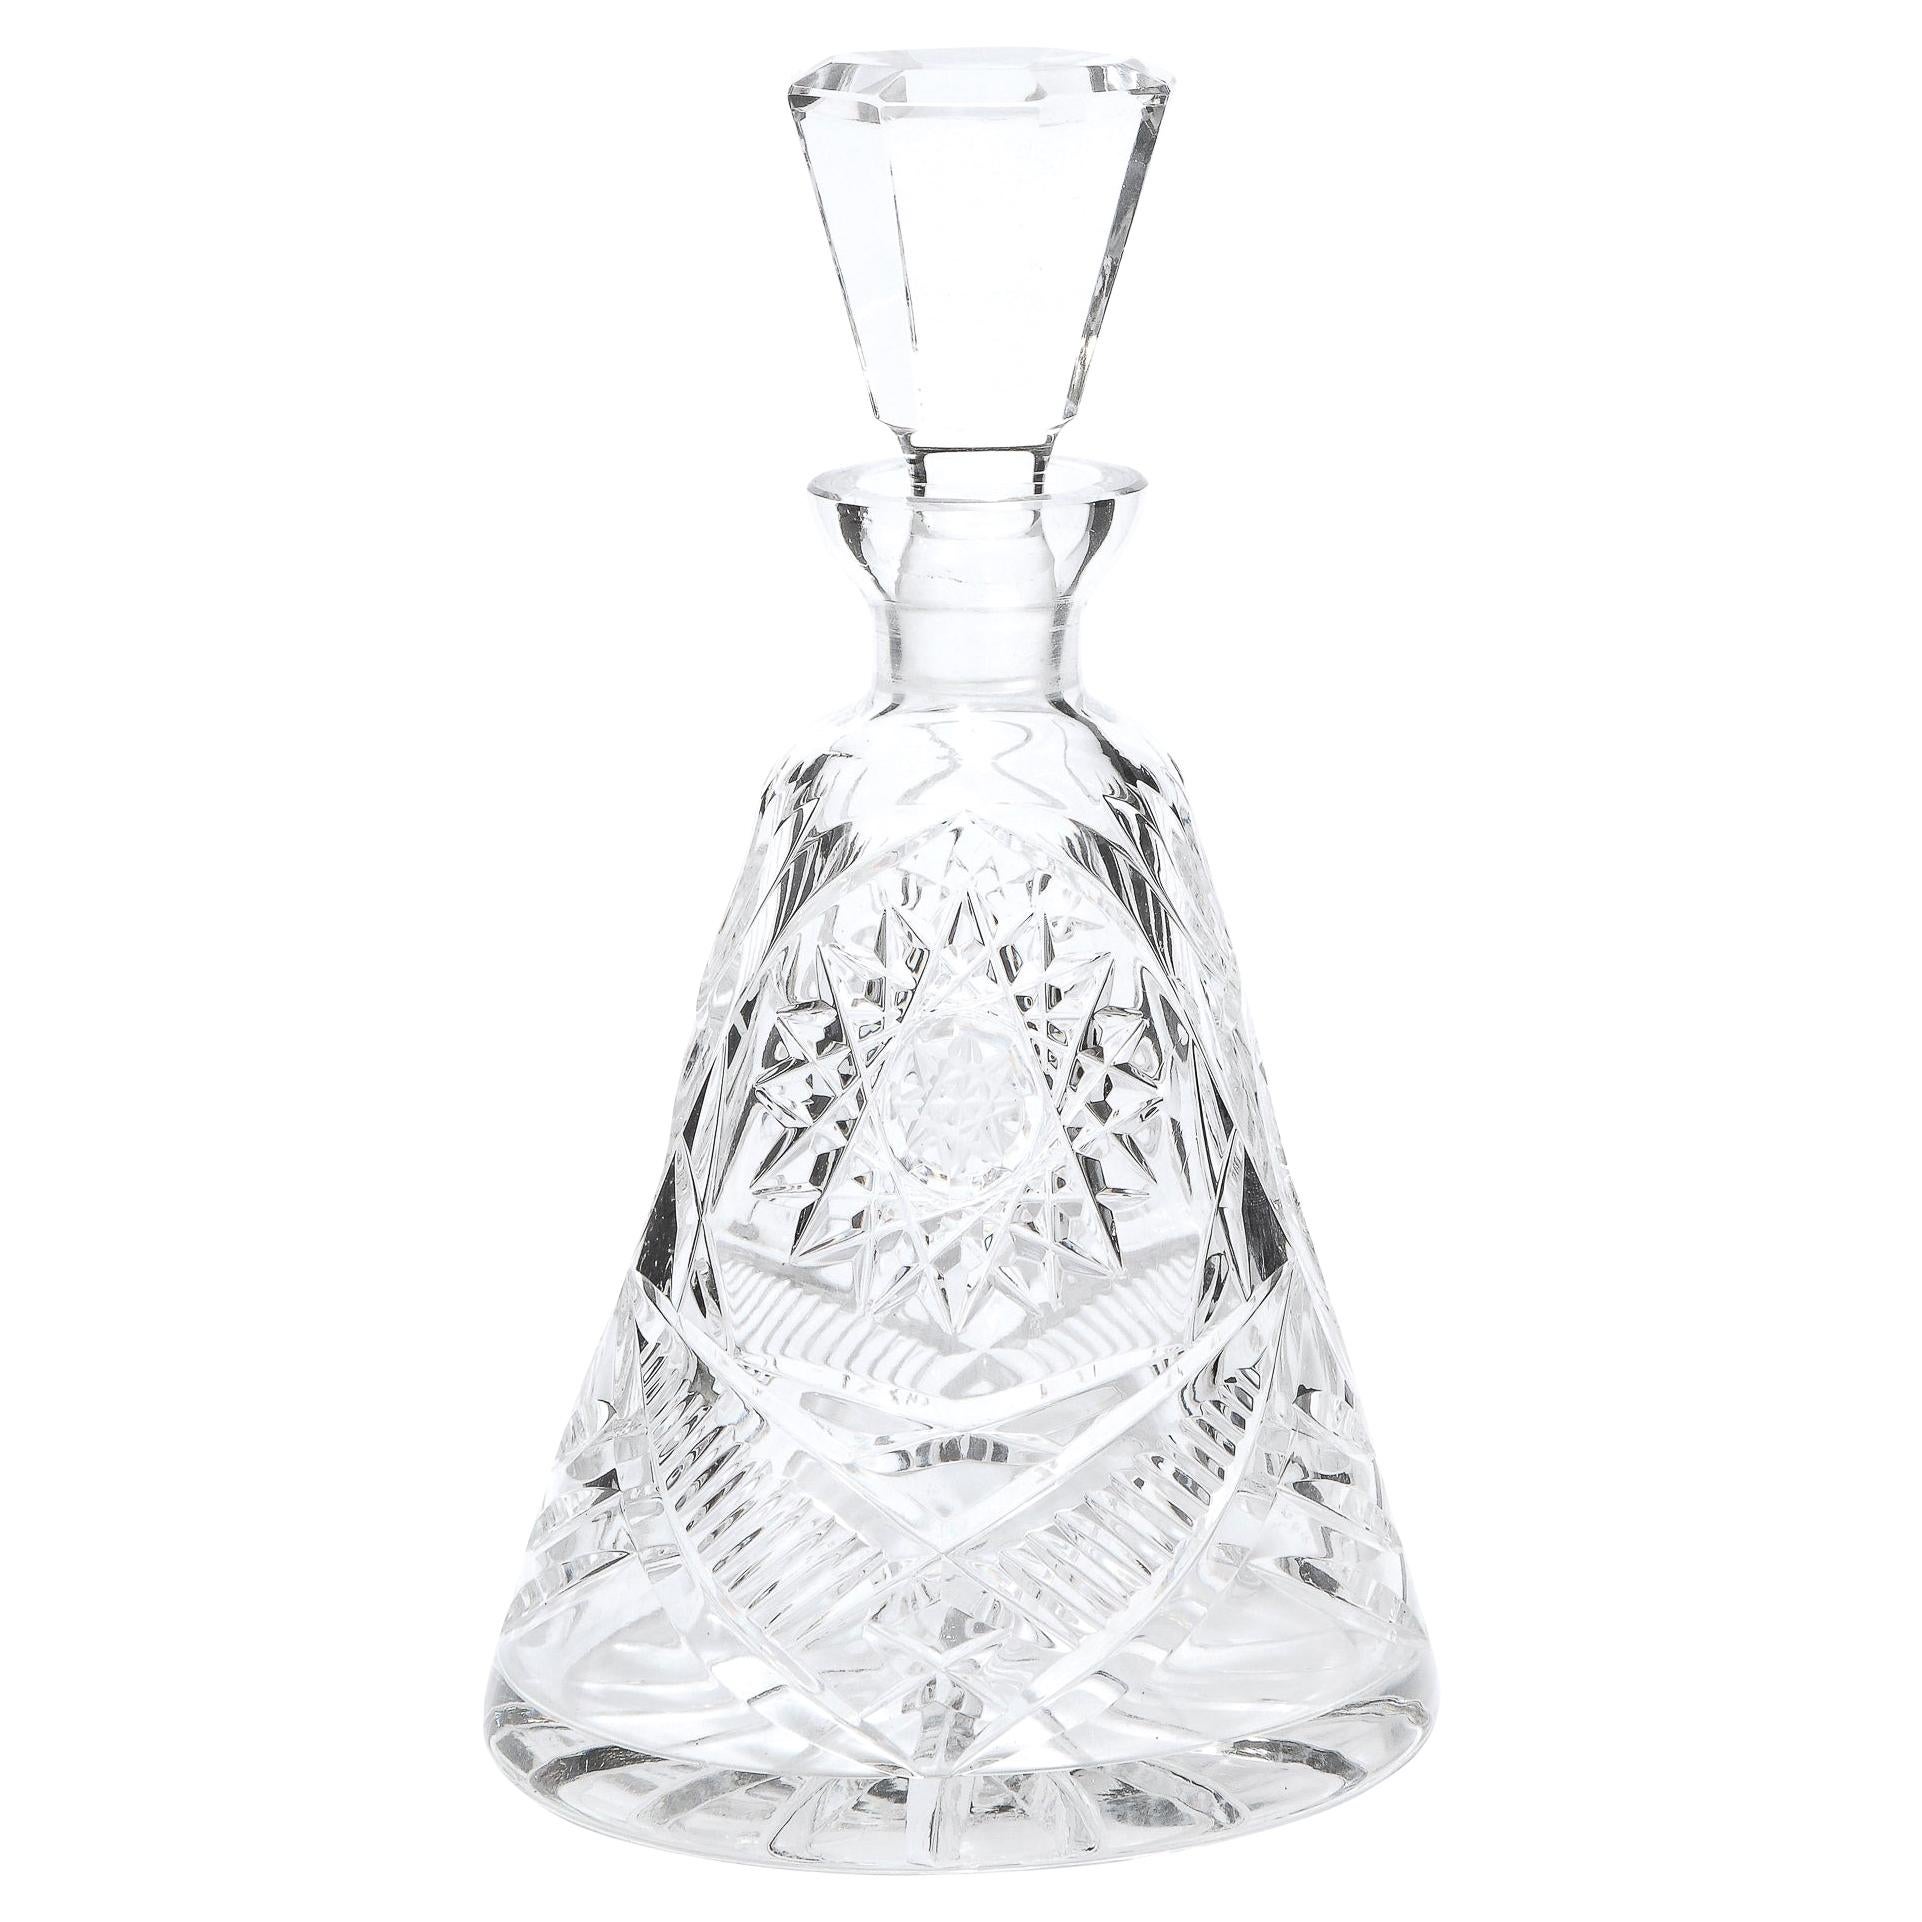 Mid-Century Modern Translucent Etched Crystal Decanter with Geometric Patterns